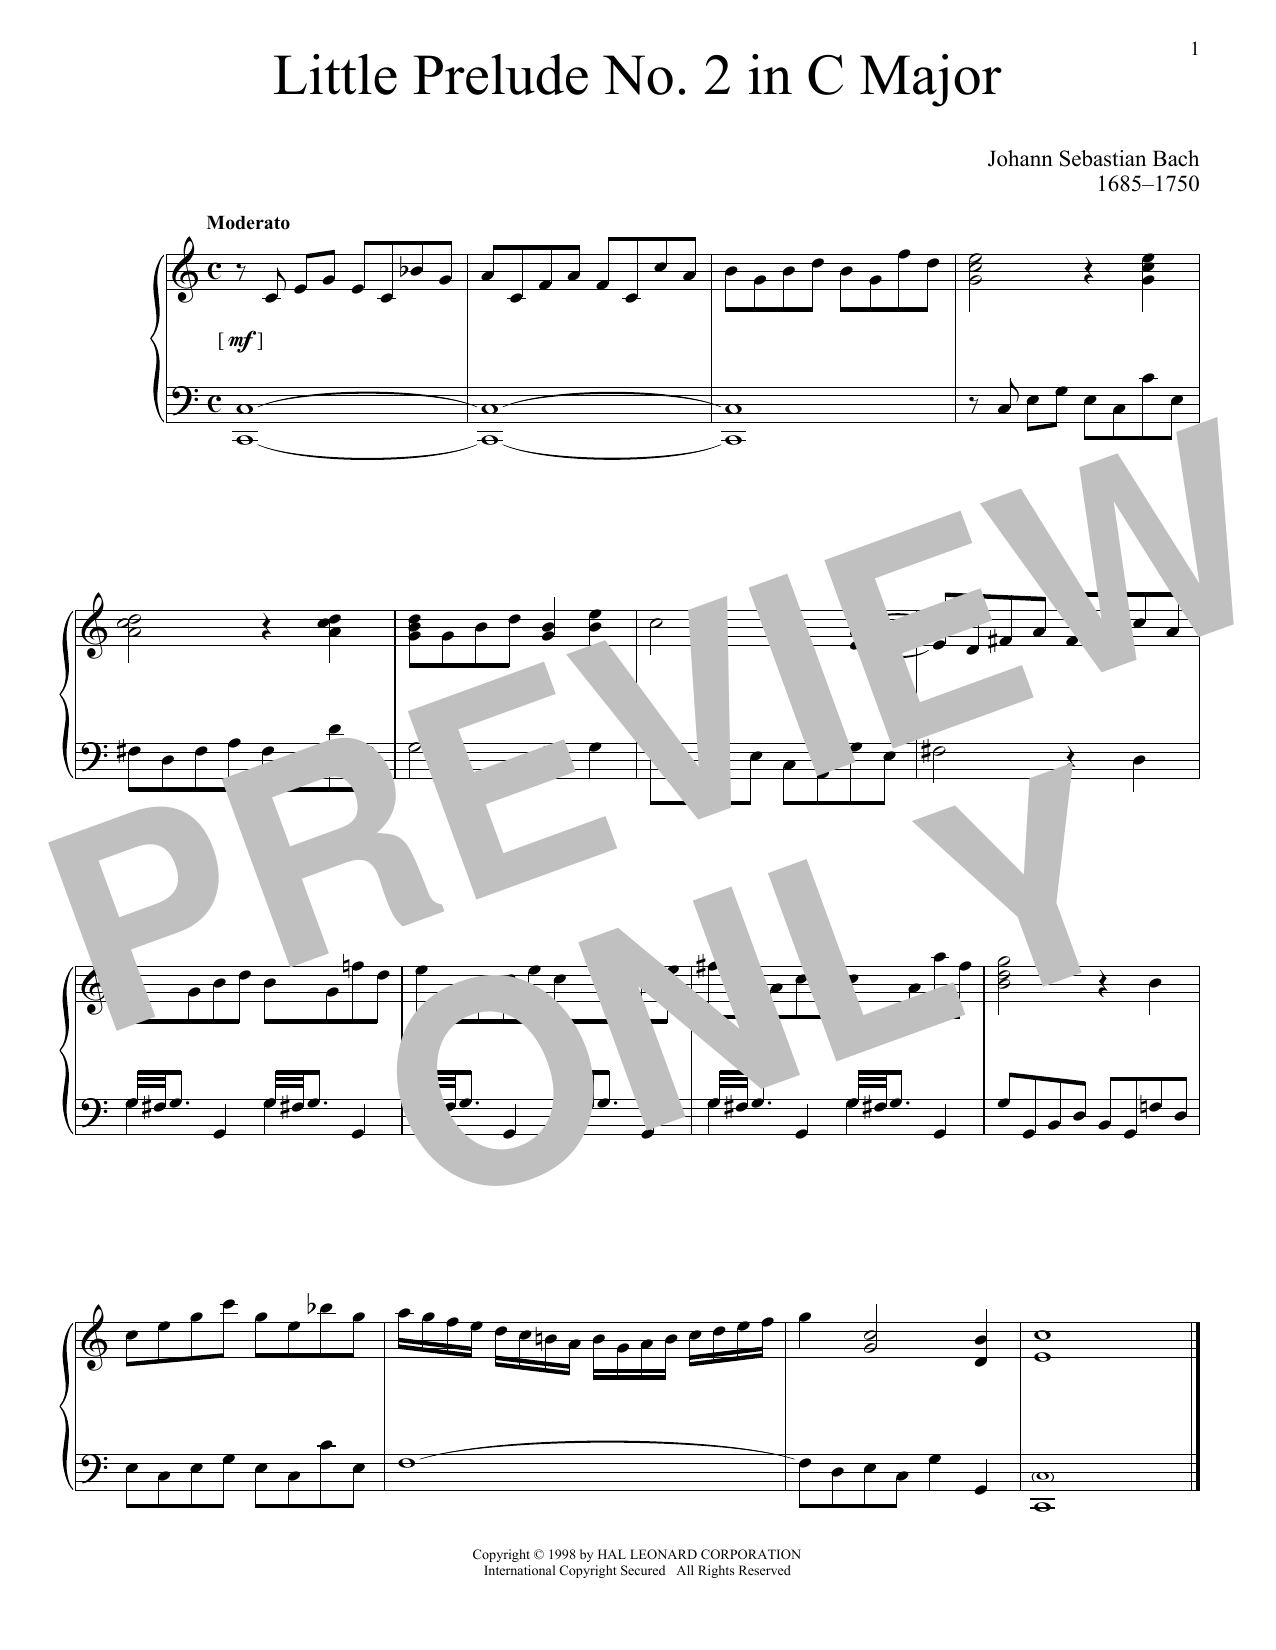 Download J.S. Bach Little Prelude No. 2 in C Major Sheet Music